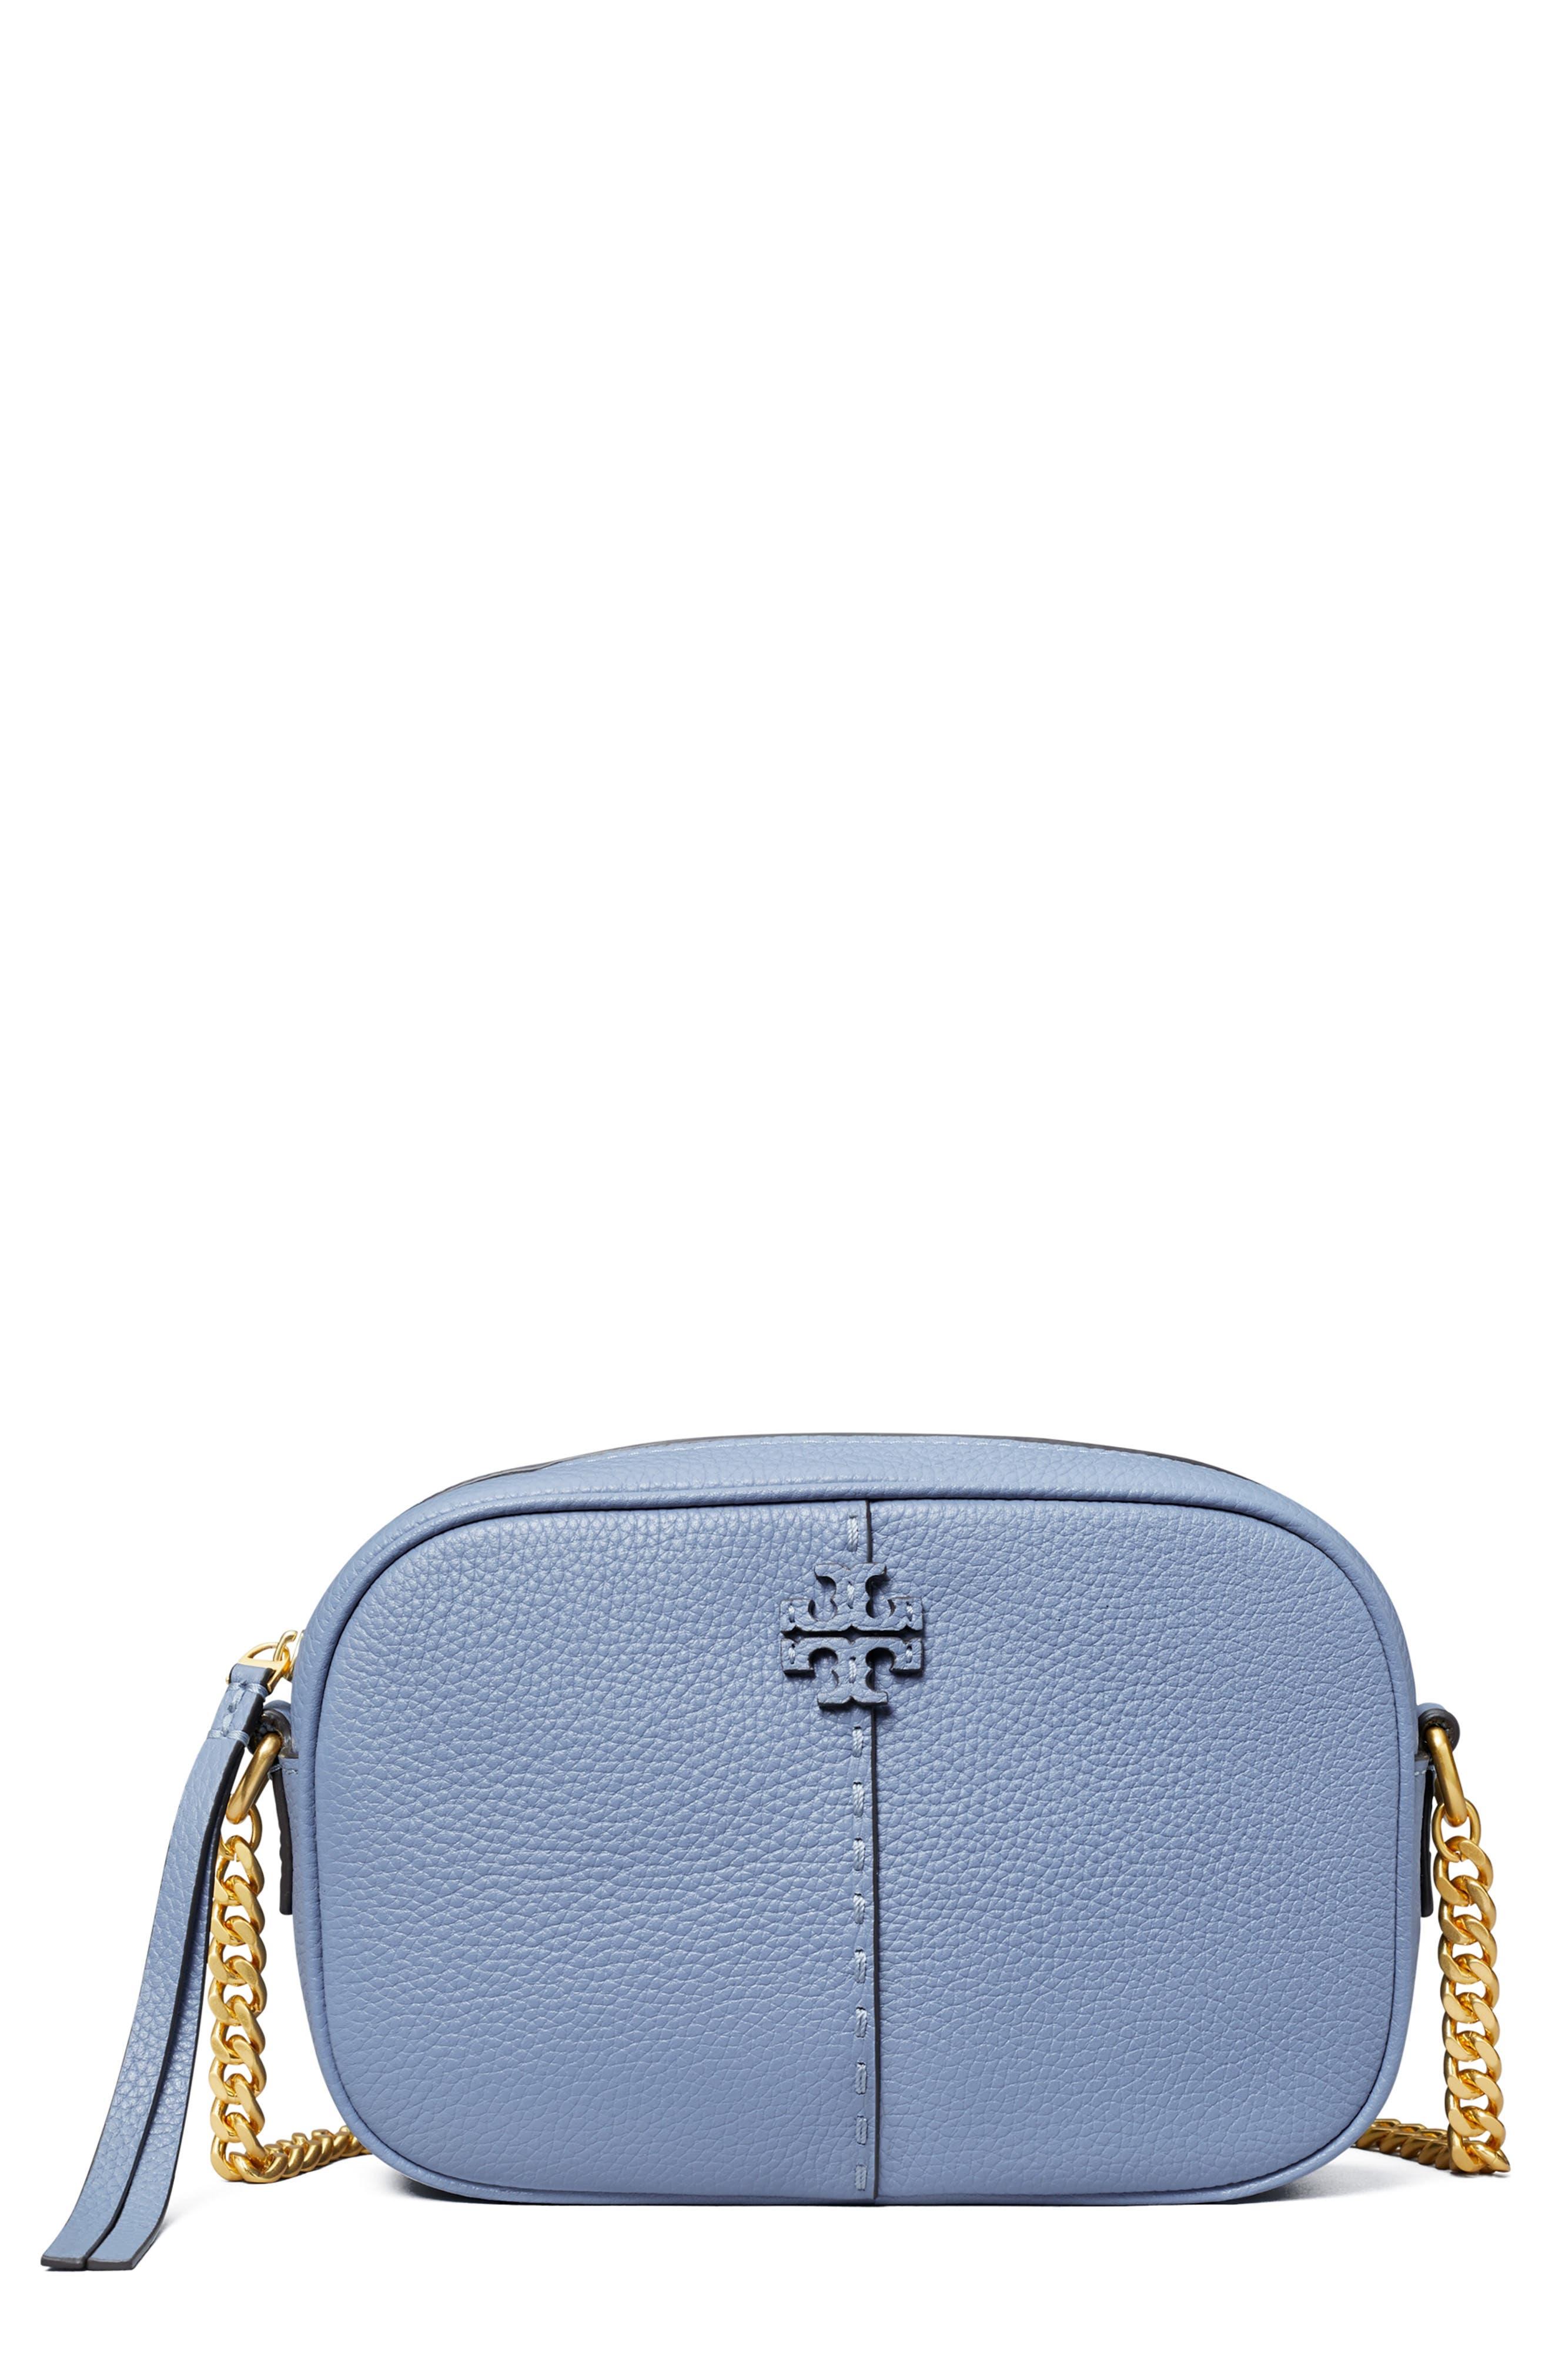 Tory Burch Mcgraw Leather Camera Bag in Blue